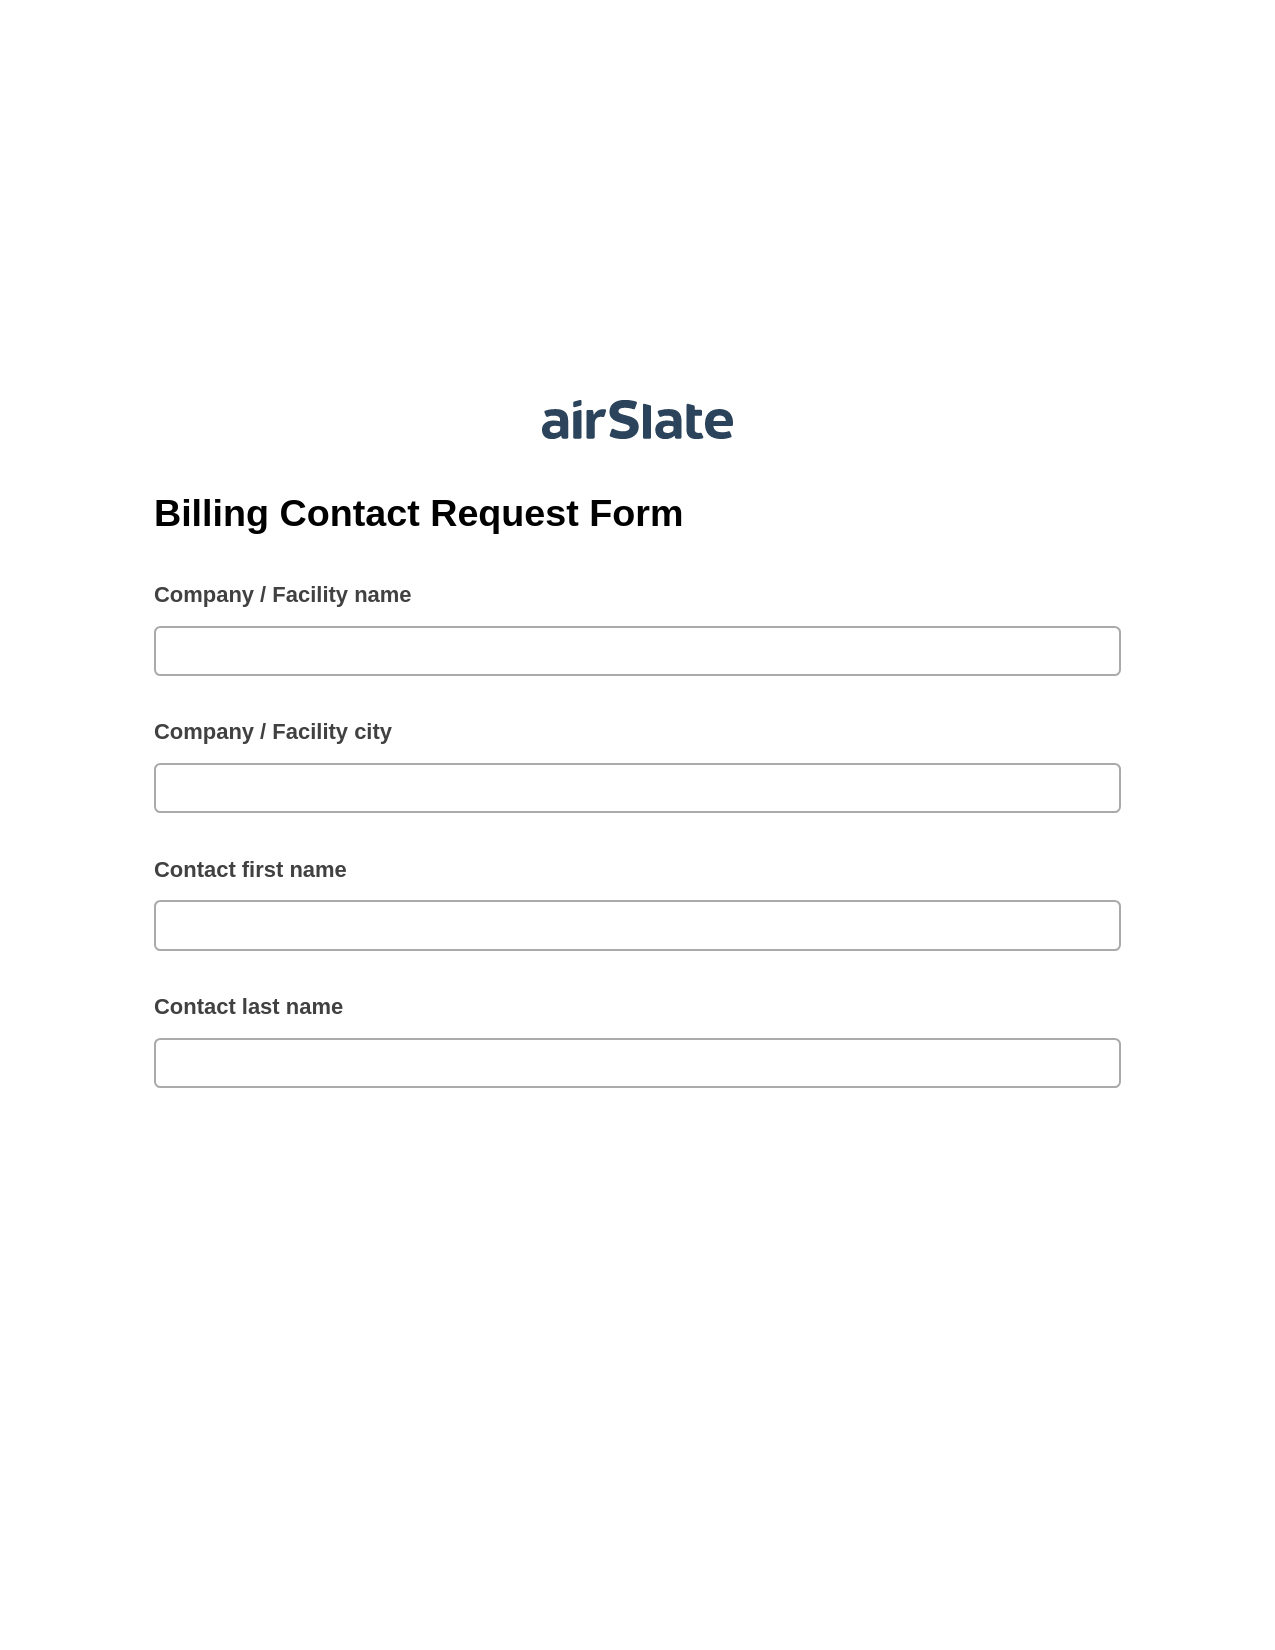 Multirole Billing Contact Request Form Pre-fill Dropdowns from Smartsheet Bot, Send a Slate with Roles Bot, Archive to SharePoint Folder Bot